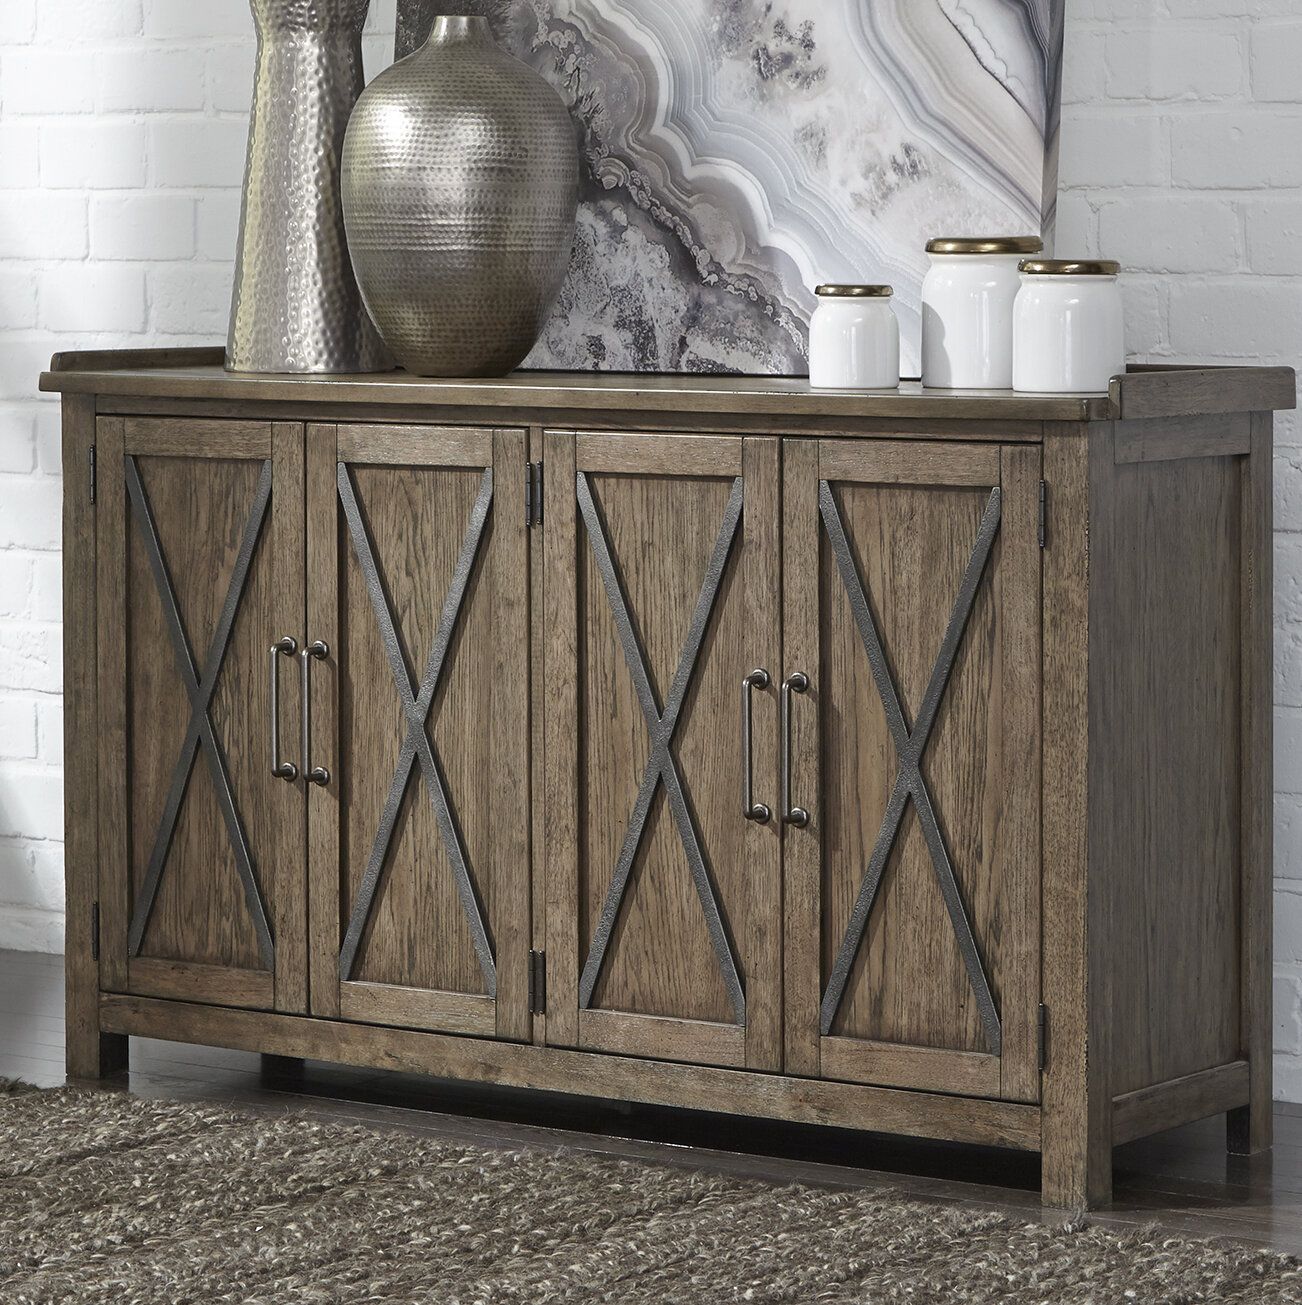 Farmhouse & Rustic Gracie Oaks Sideboards & Buffets | Birch Lane With Regard To Hayter Sideboards (View 28 of 30)